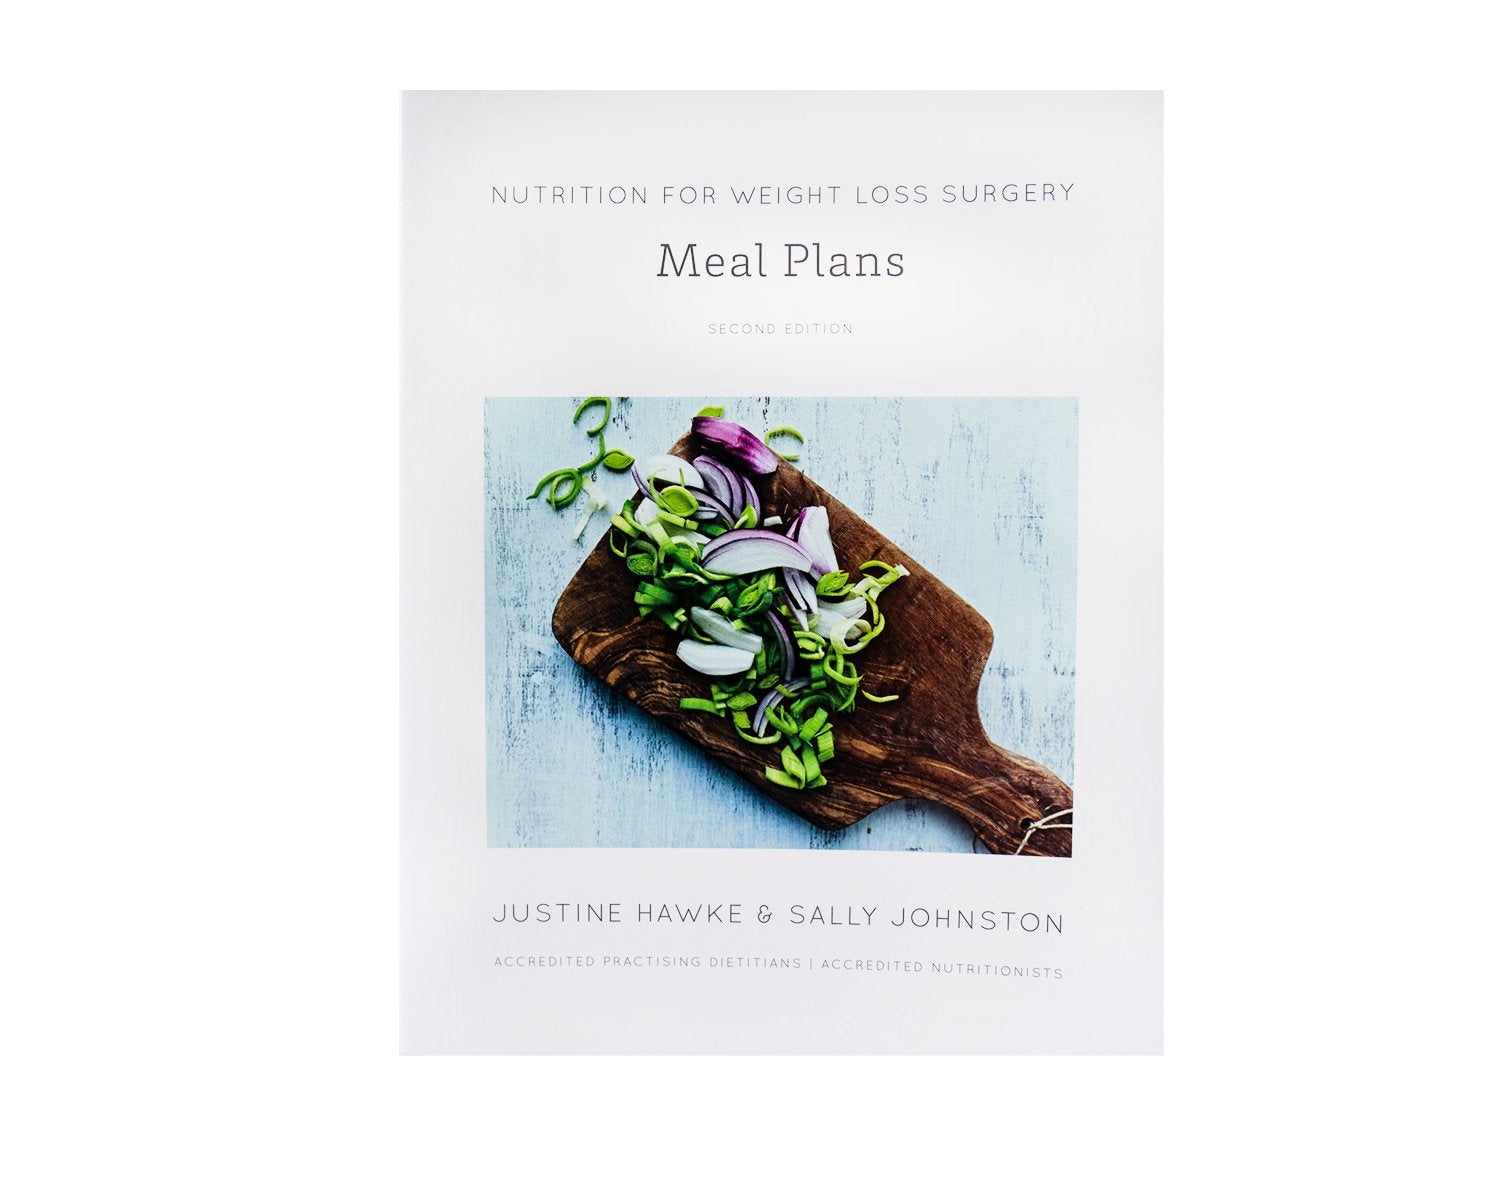 Nutrition for Weight Loss Surgery: Meal Plans - WLS Book